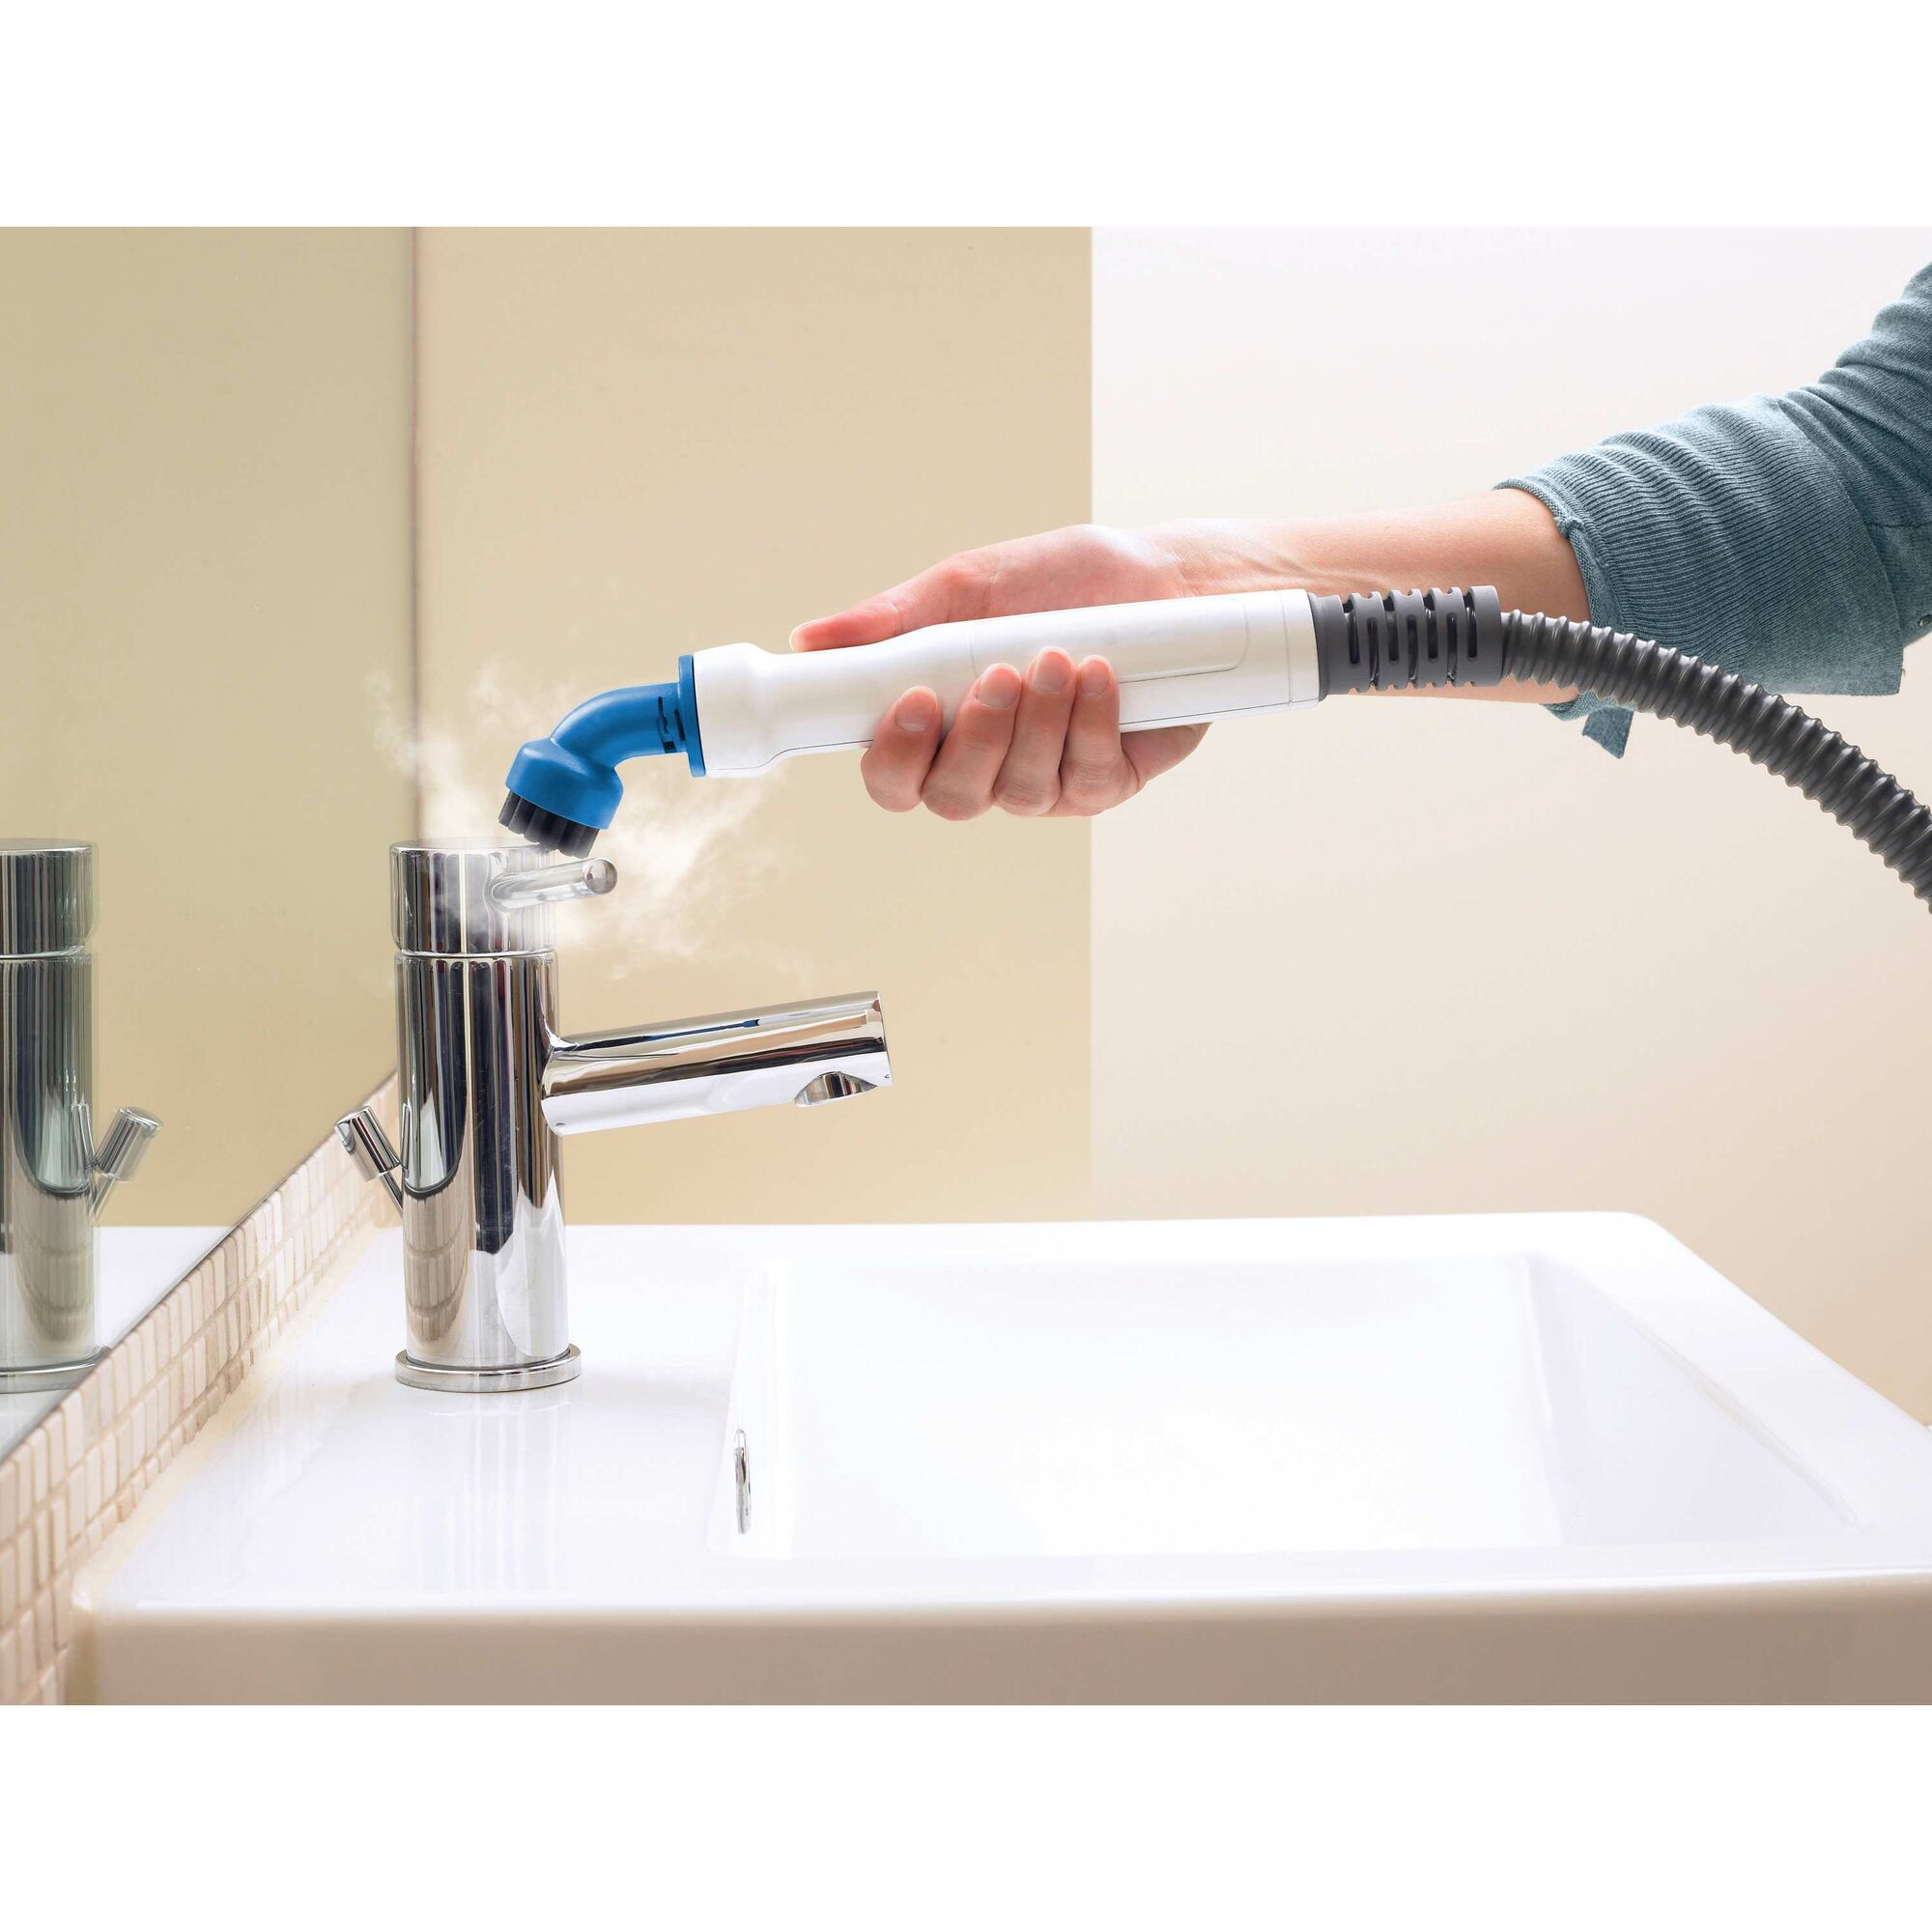 8 in 1 complete steam cleaning system being used by a person to clean the tap.